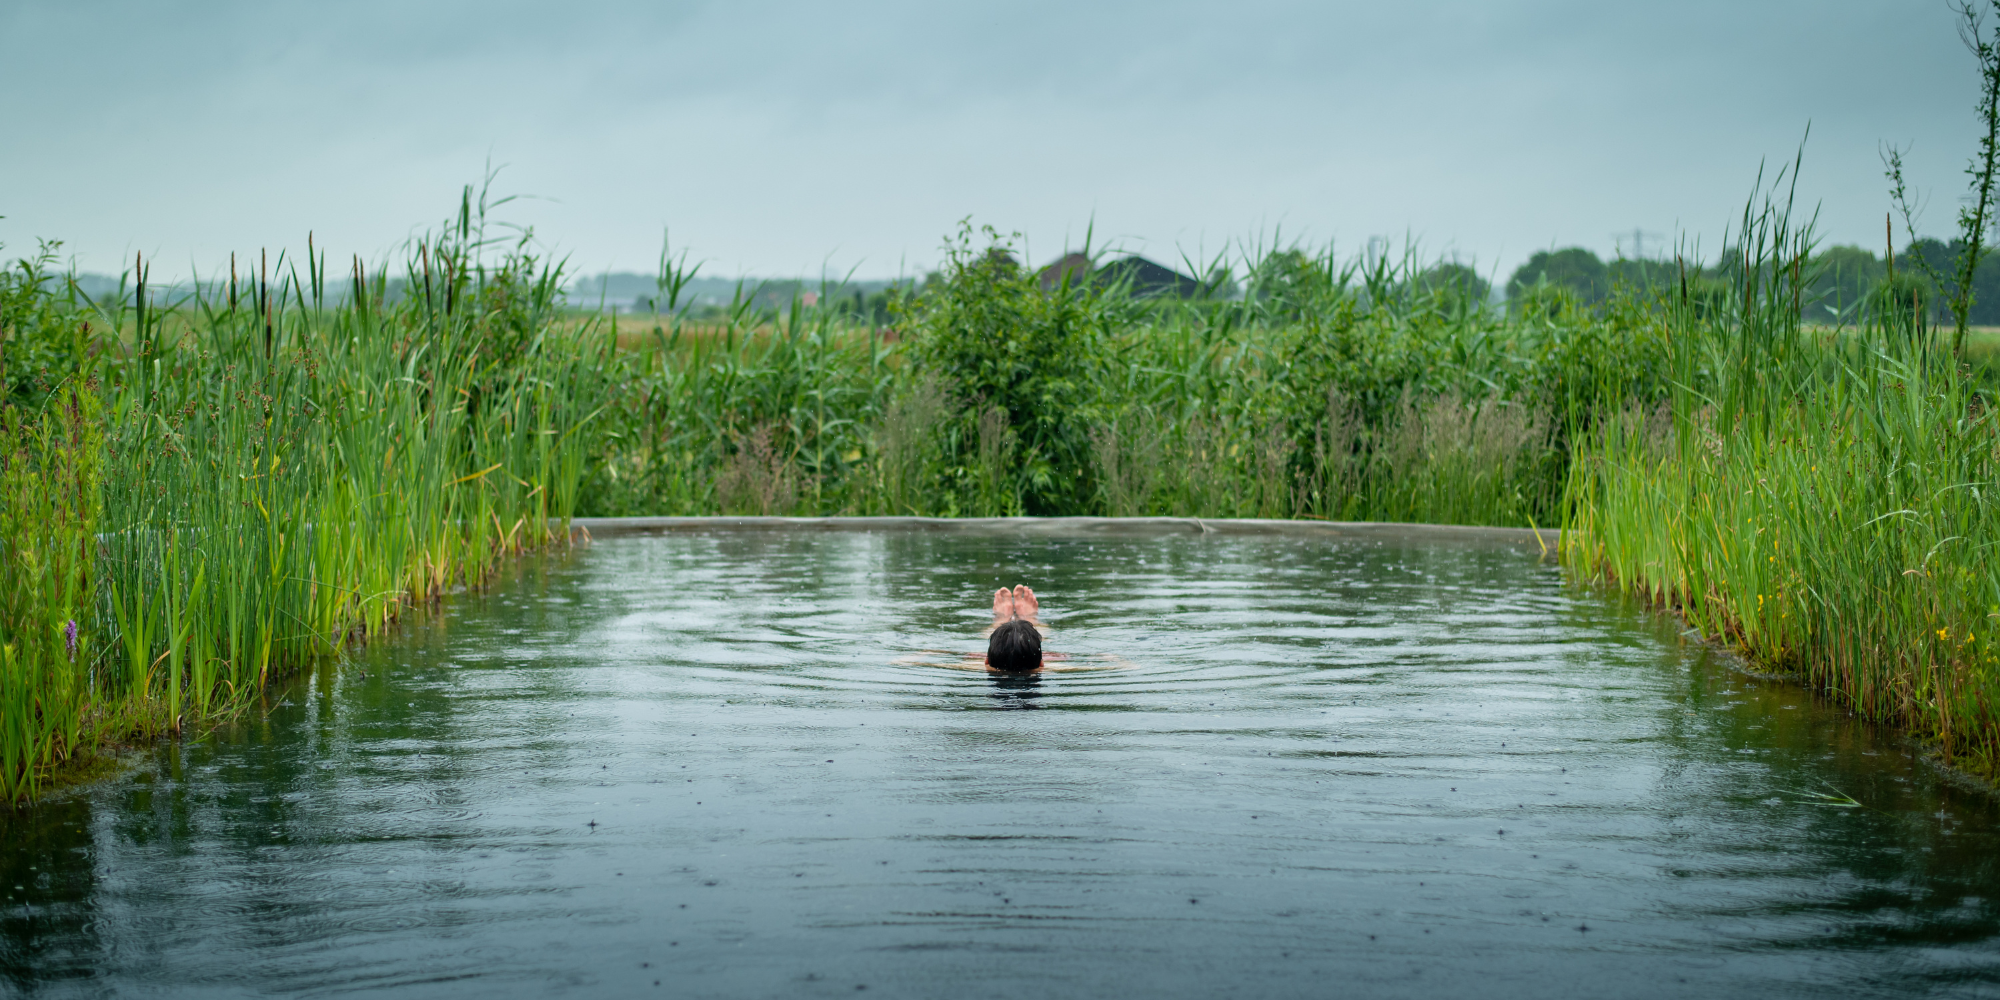 Starting with wild swimming? No better time than summer